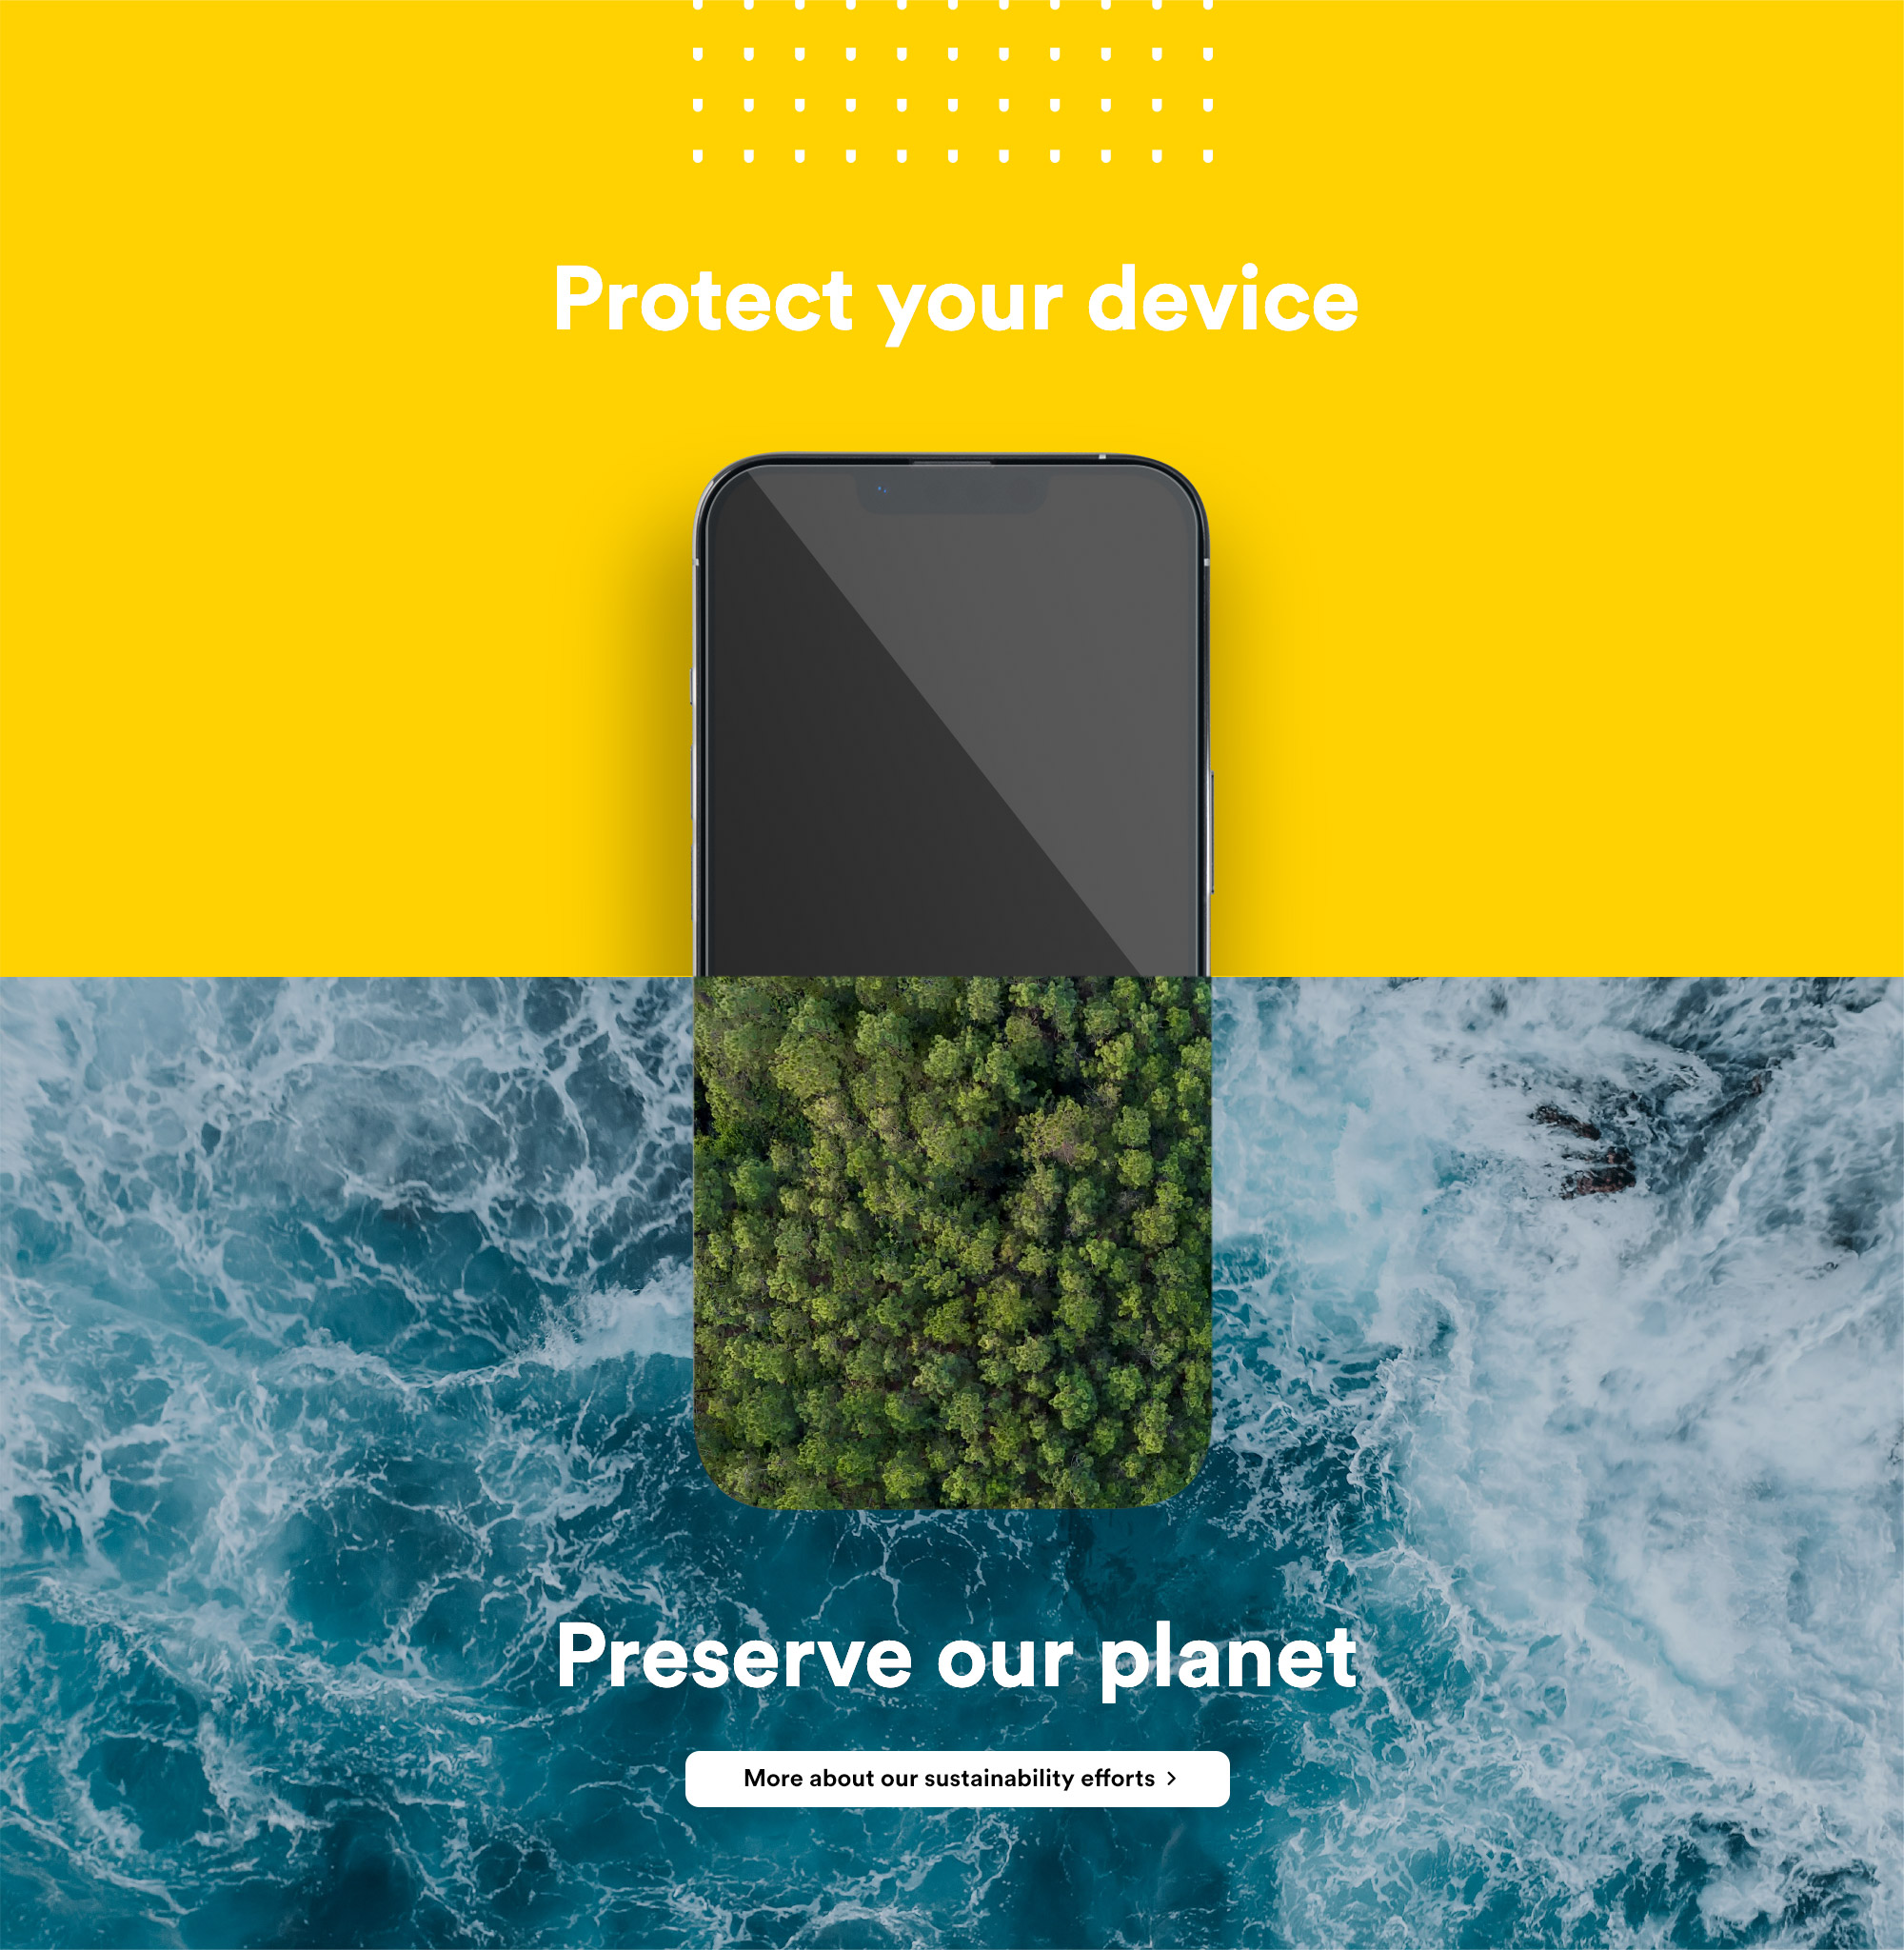 Protect your device, preserve our planet.